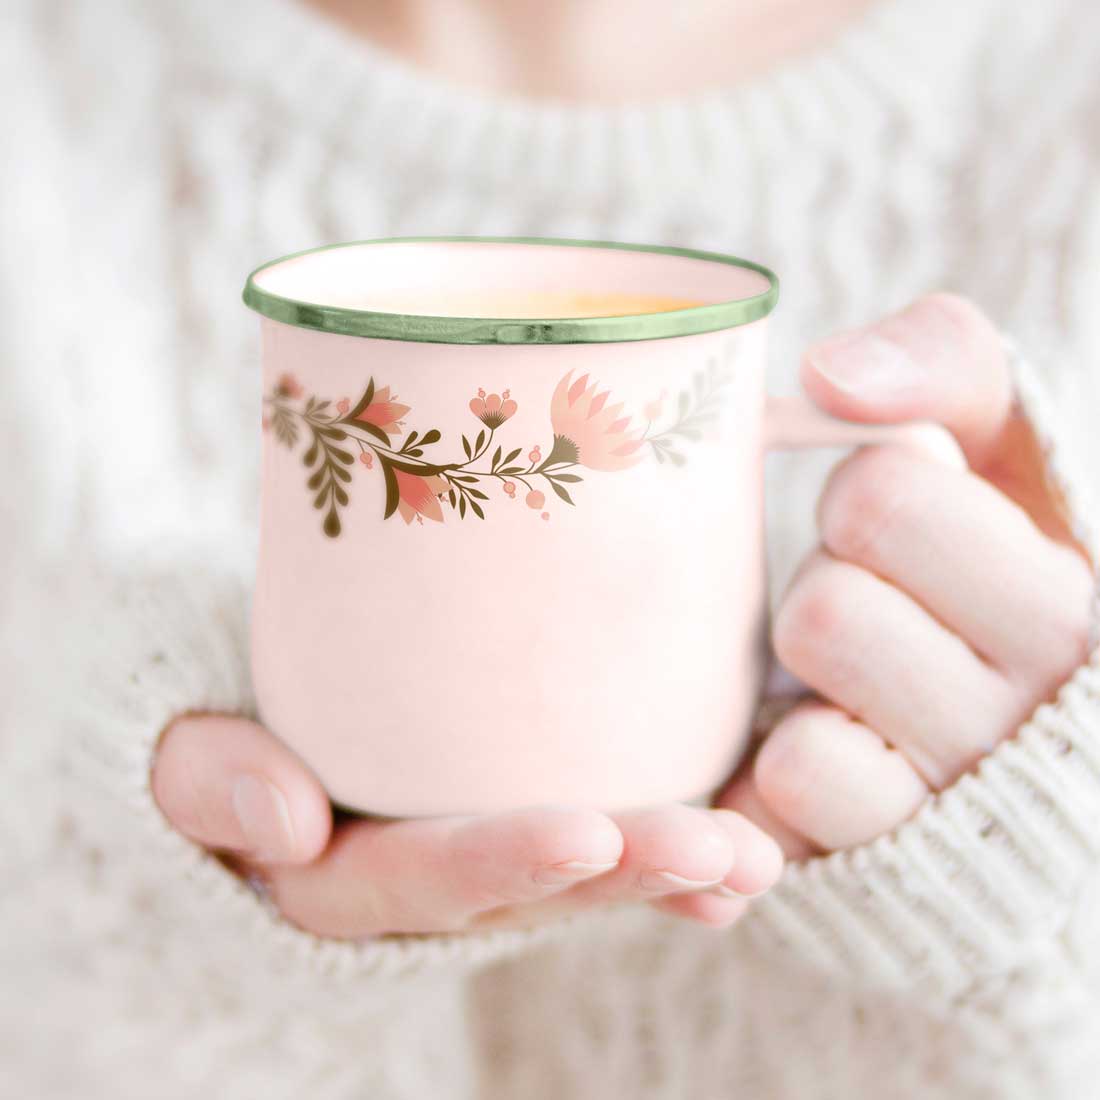 Woman holding a pink coffee mug in her hands.